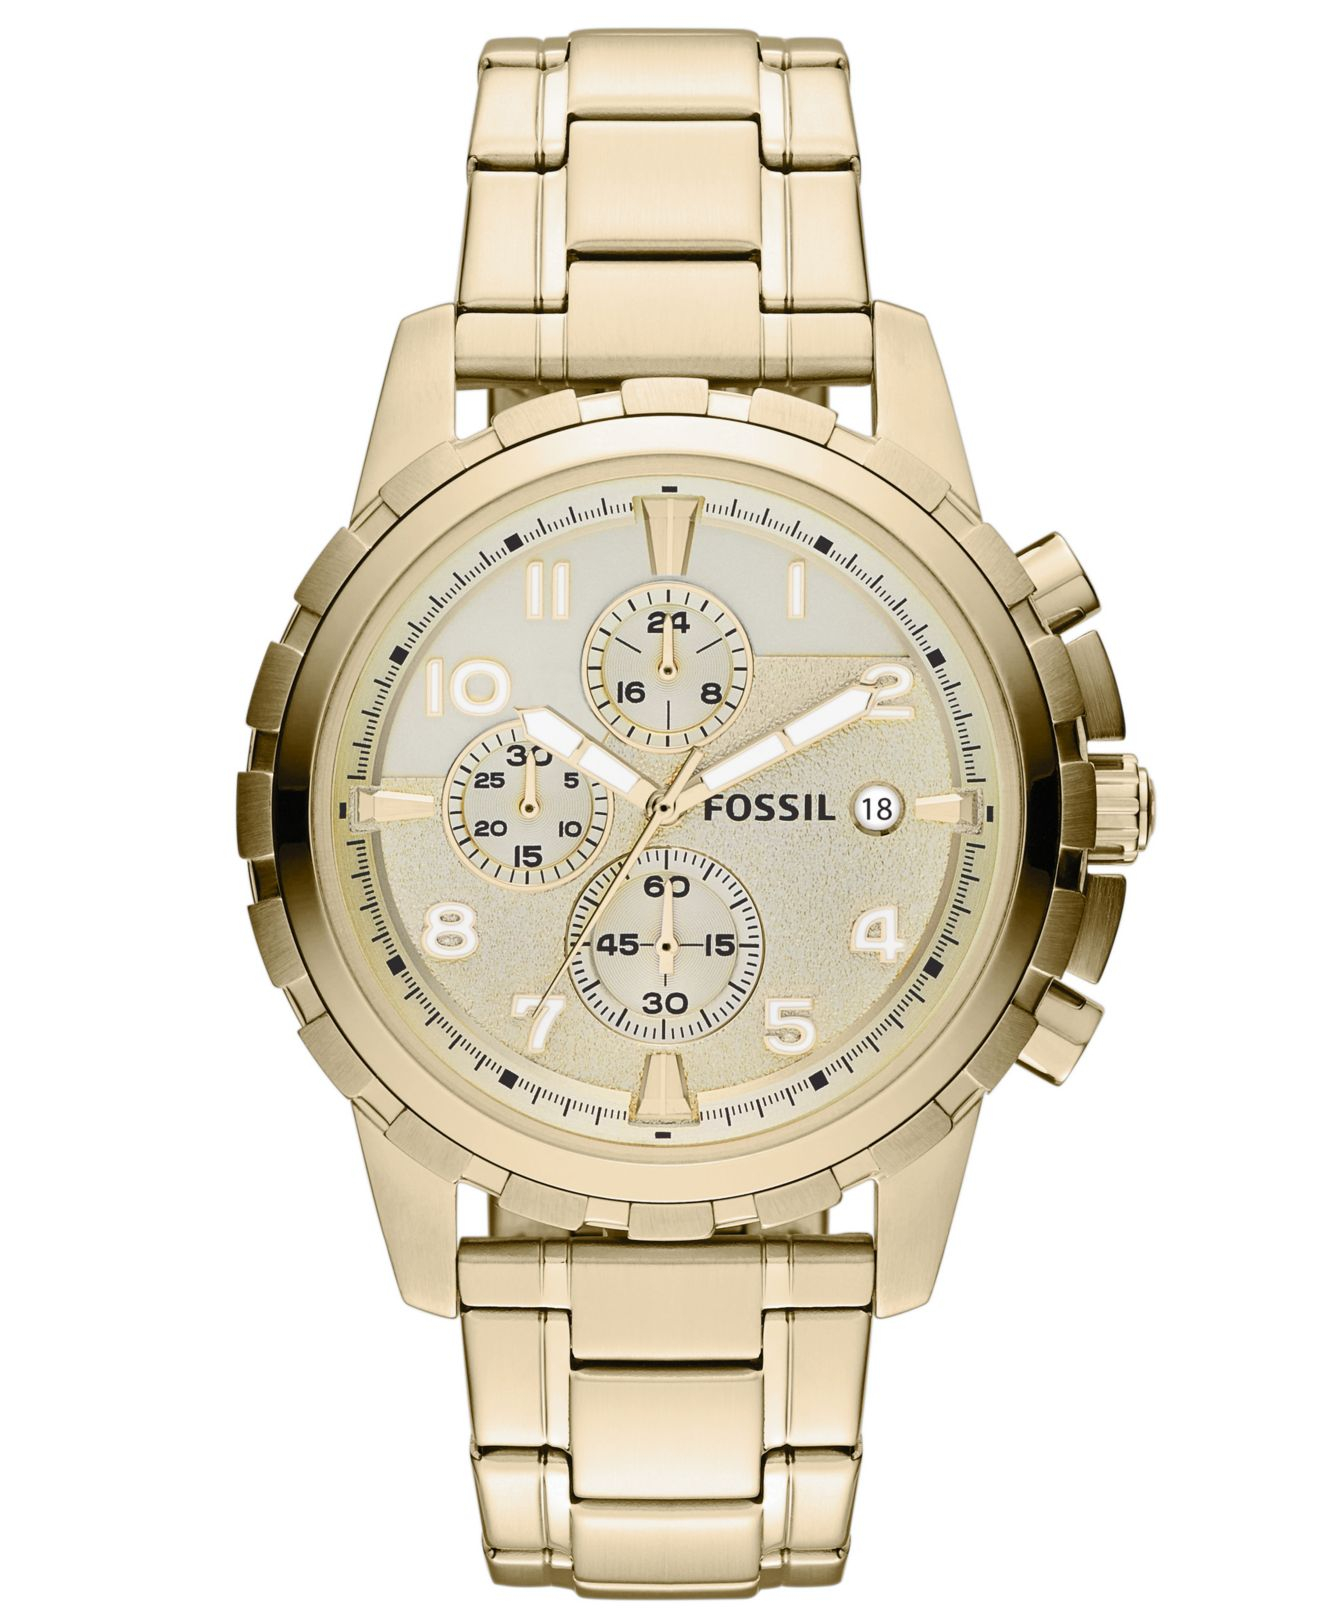 Fossil Men's Chronograph Dean Gold-tone Stainless Steel Bracelet Watch